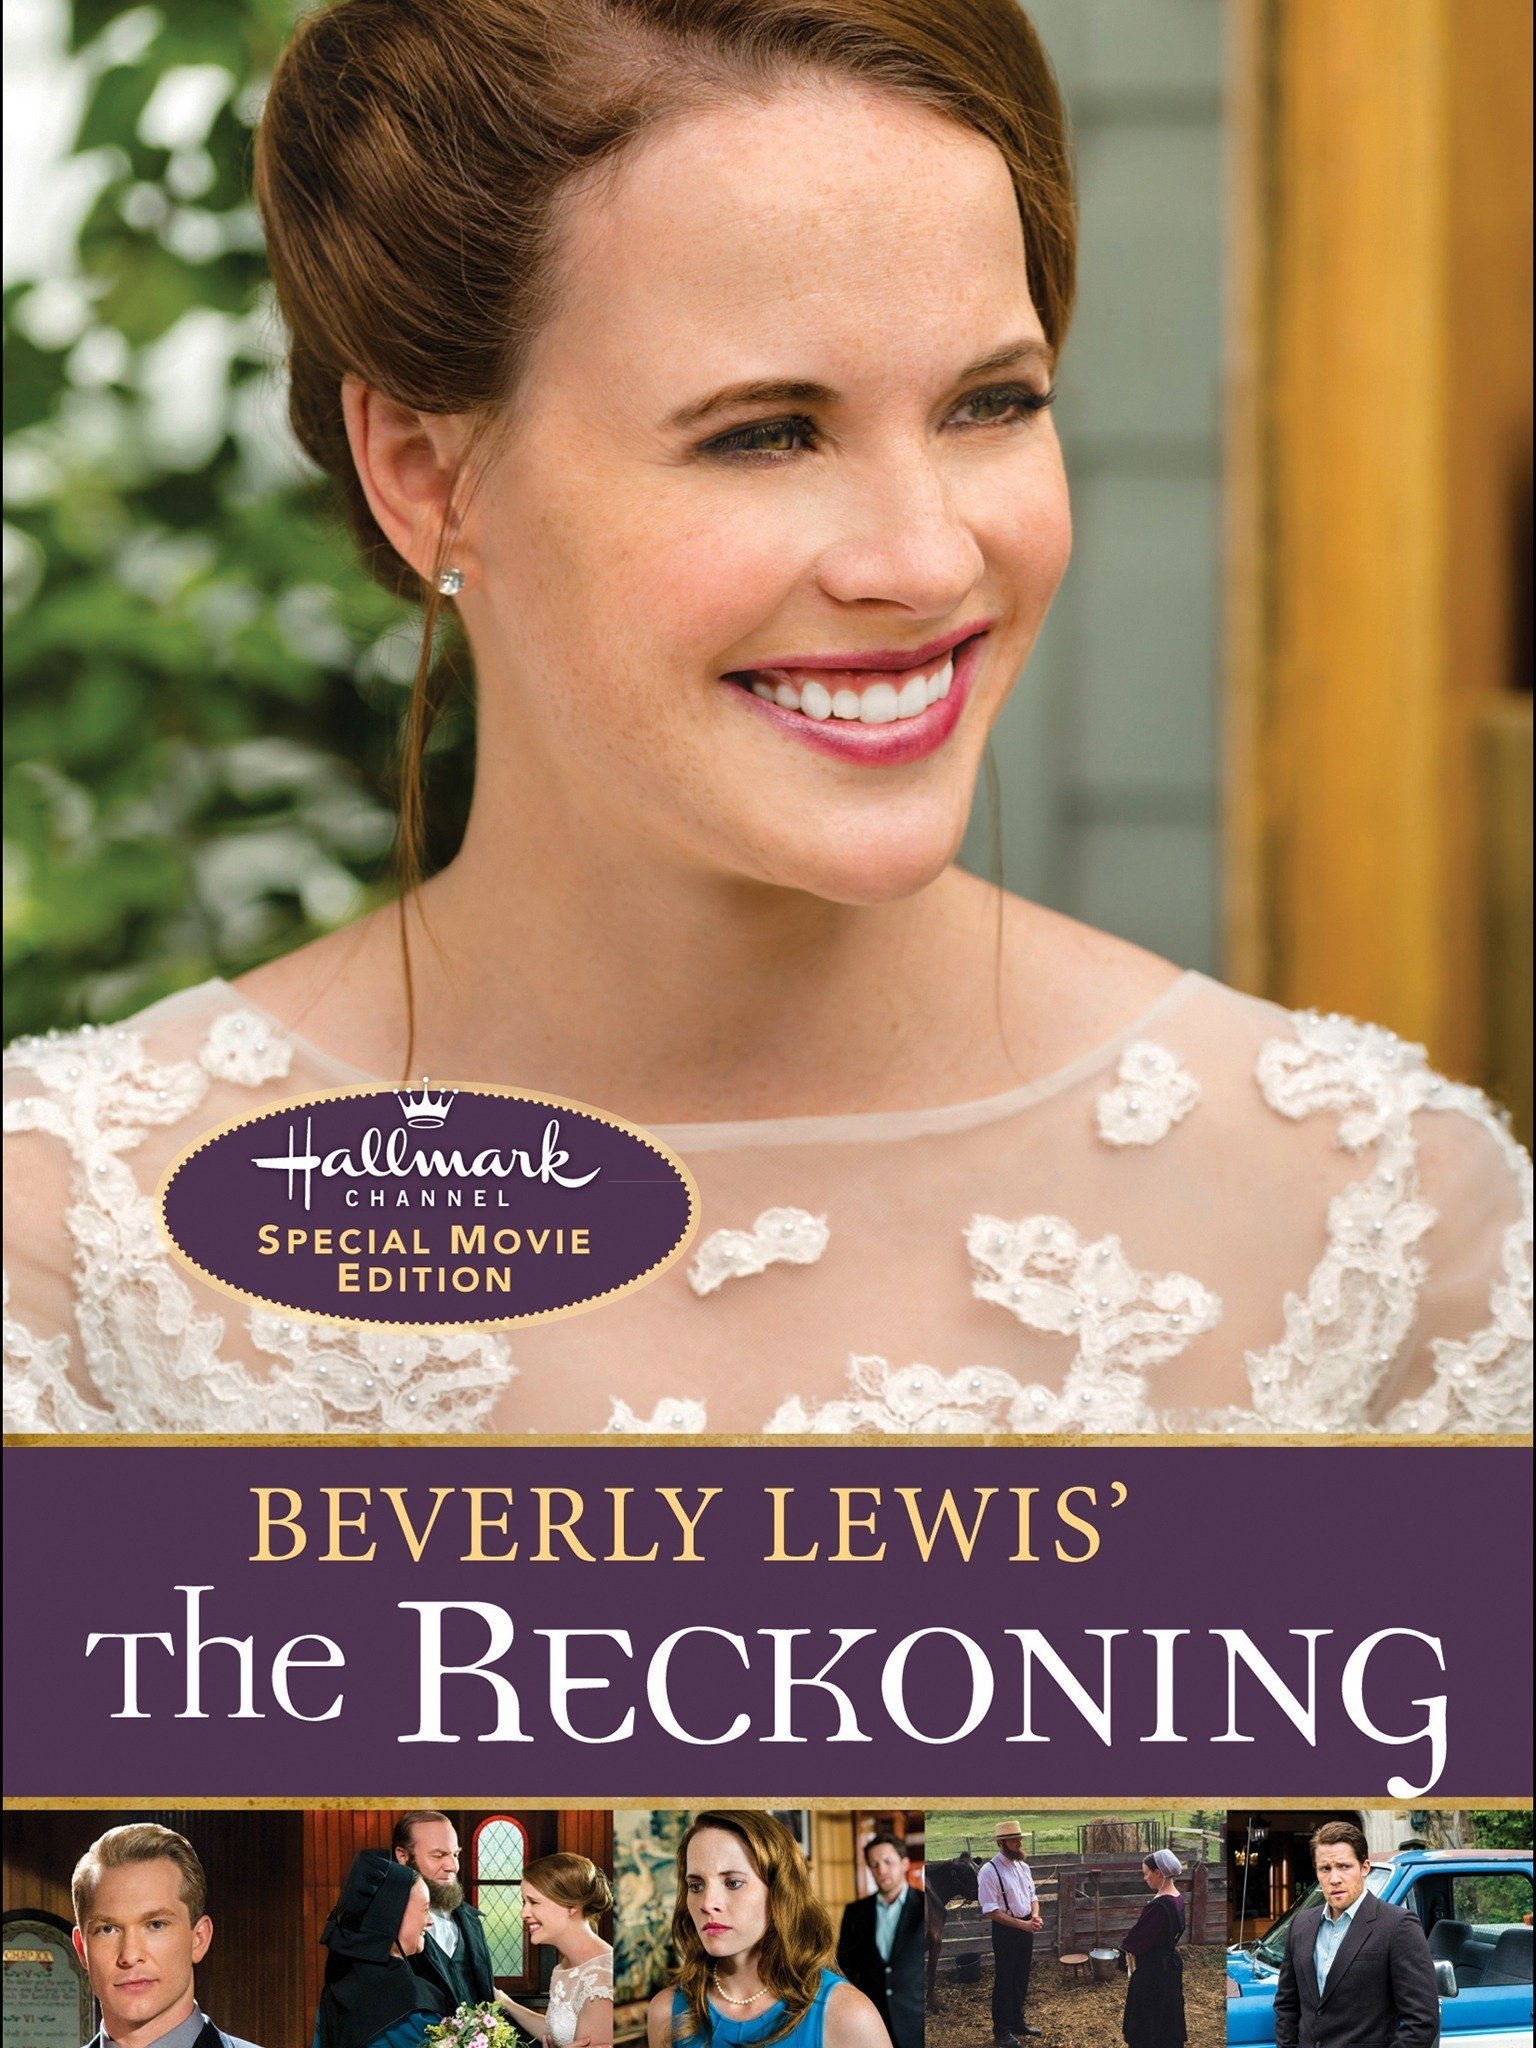 the reckoning beverly lewis book